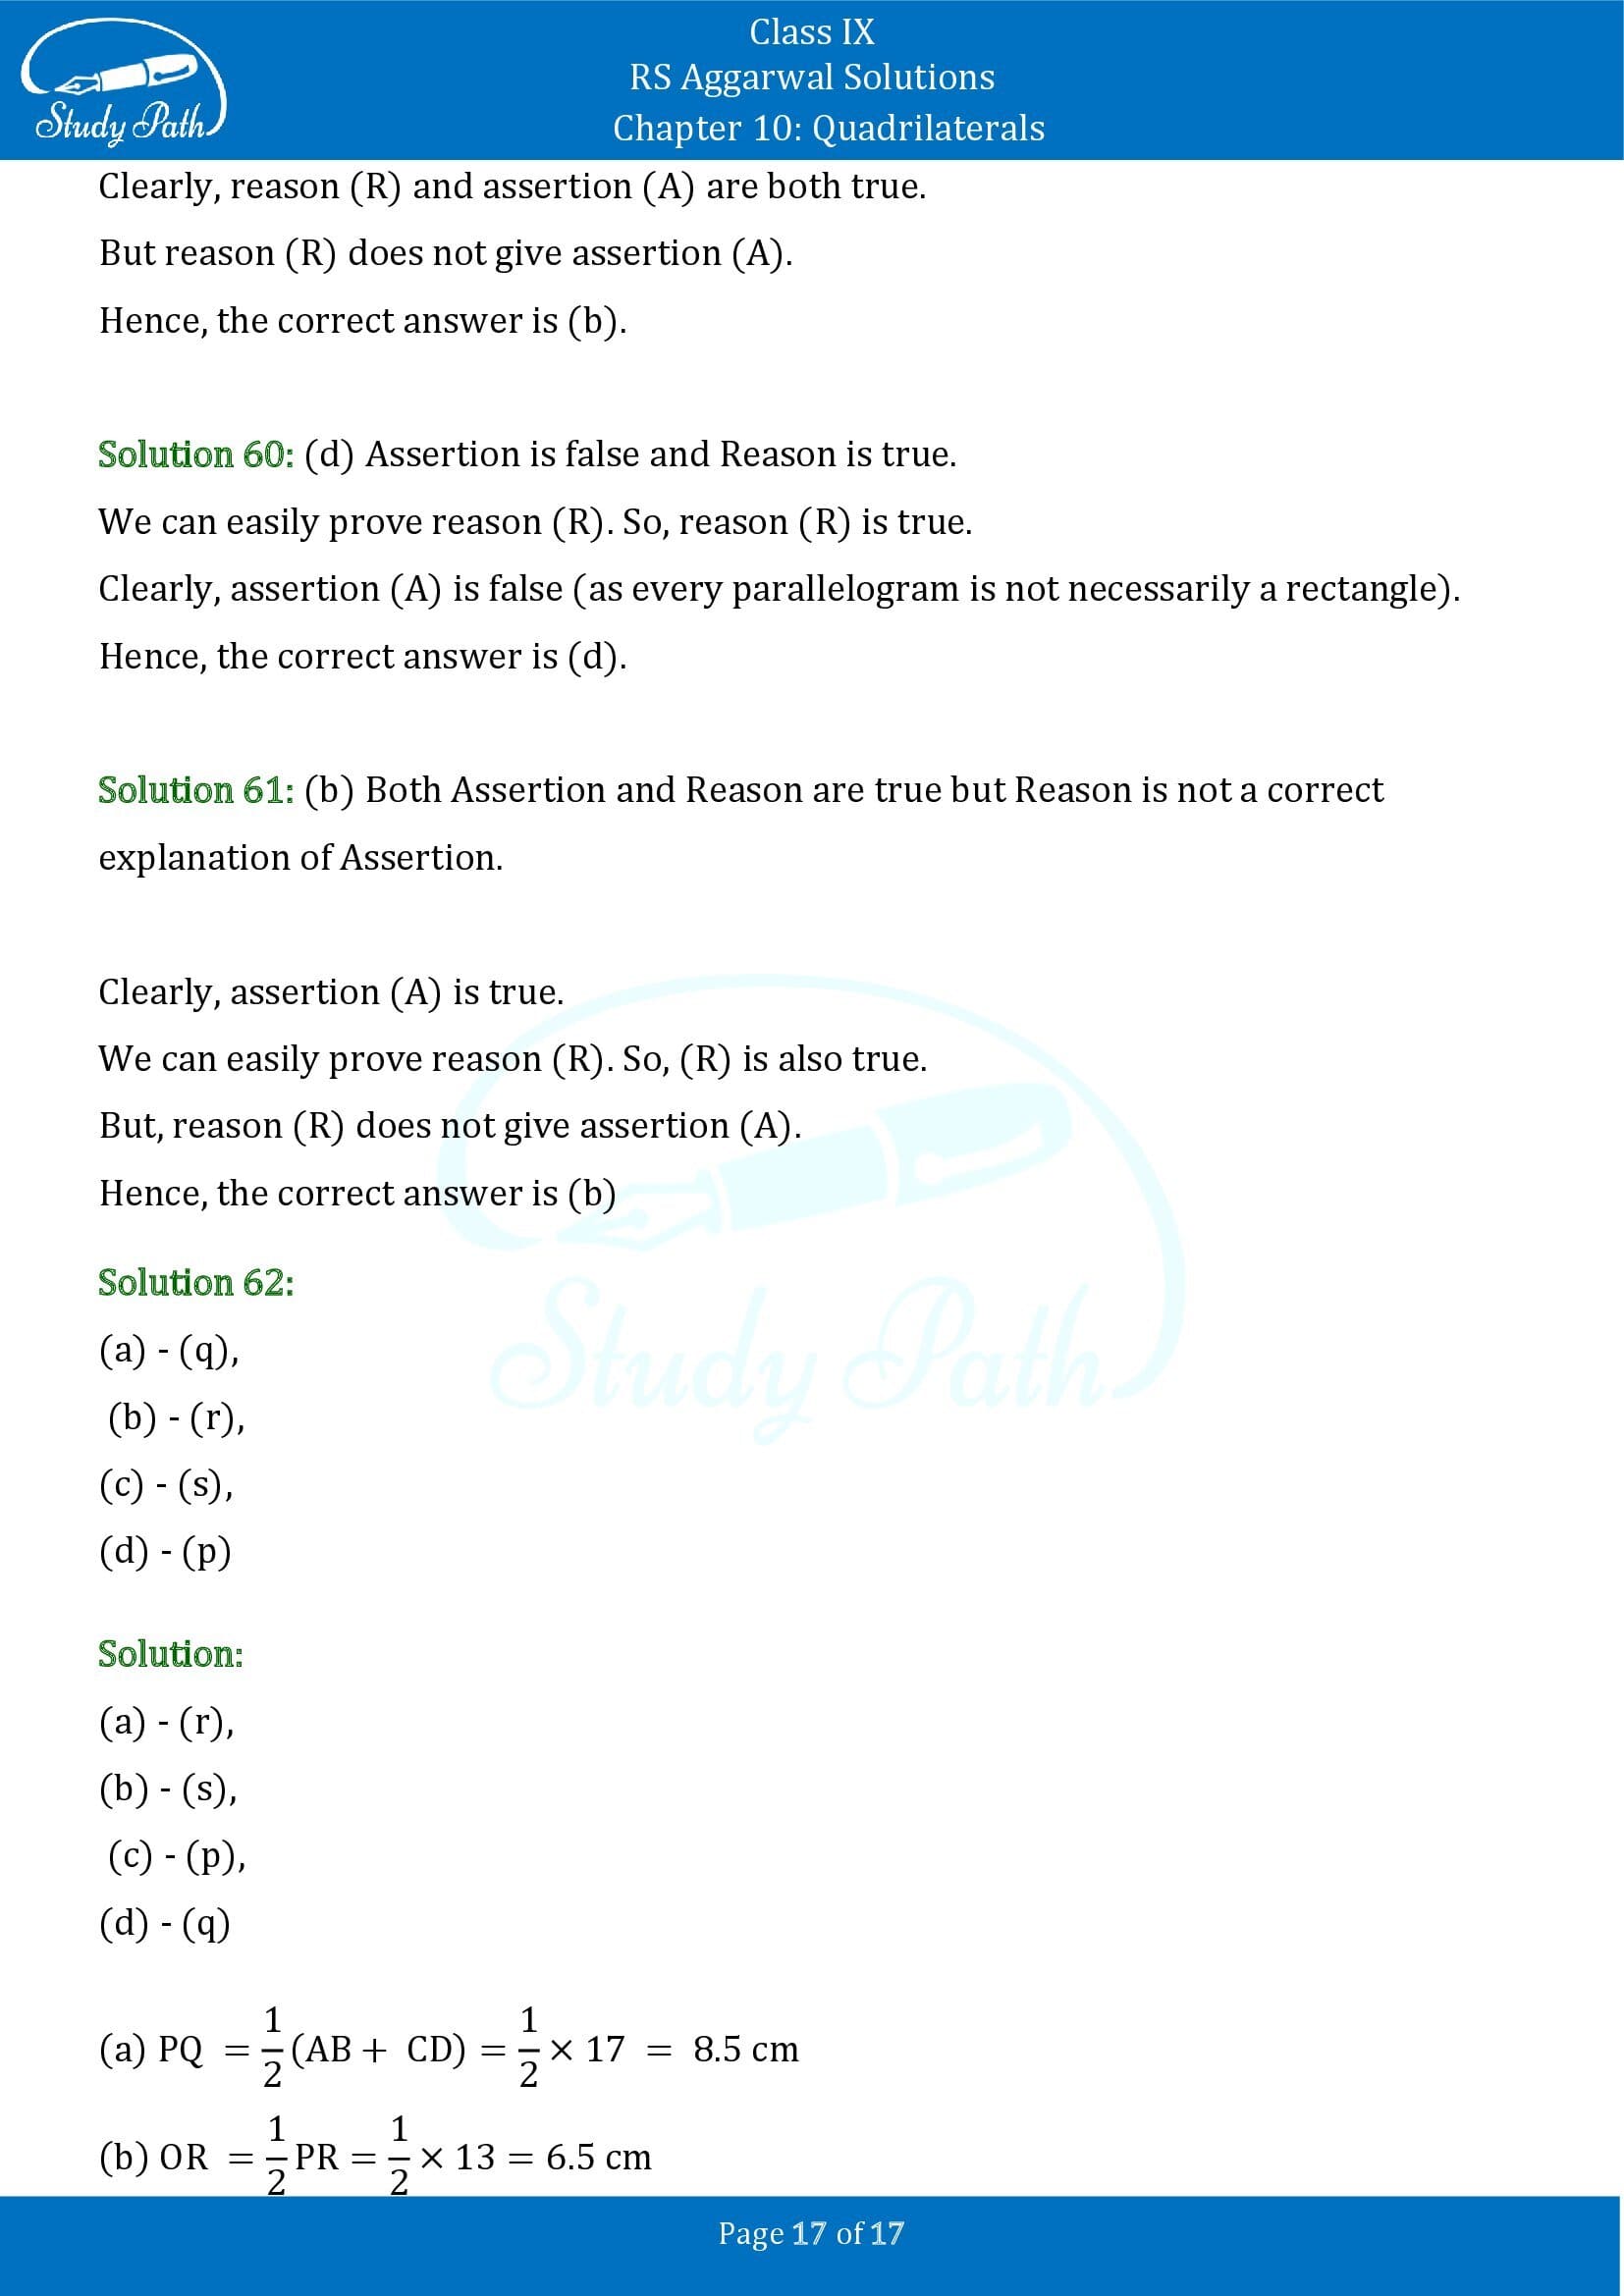 RS Aggarwal Solutions Class 9 Chapter 10 Quadrilaterals Multiple Choice Questions MCQs 00017